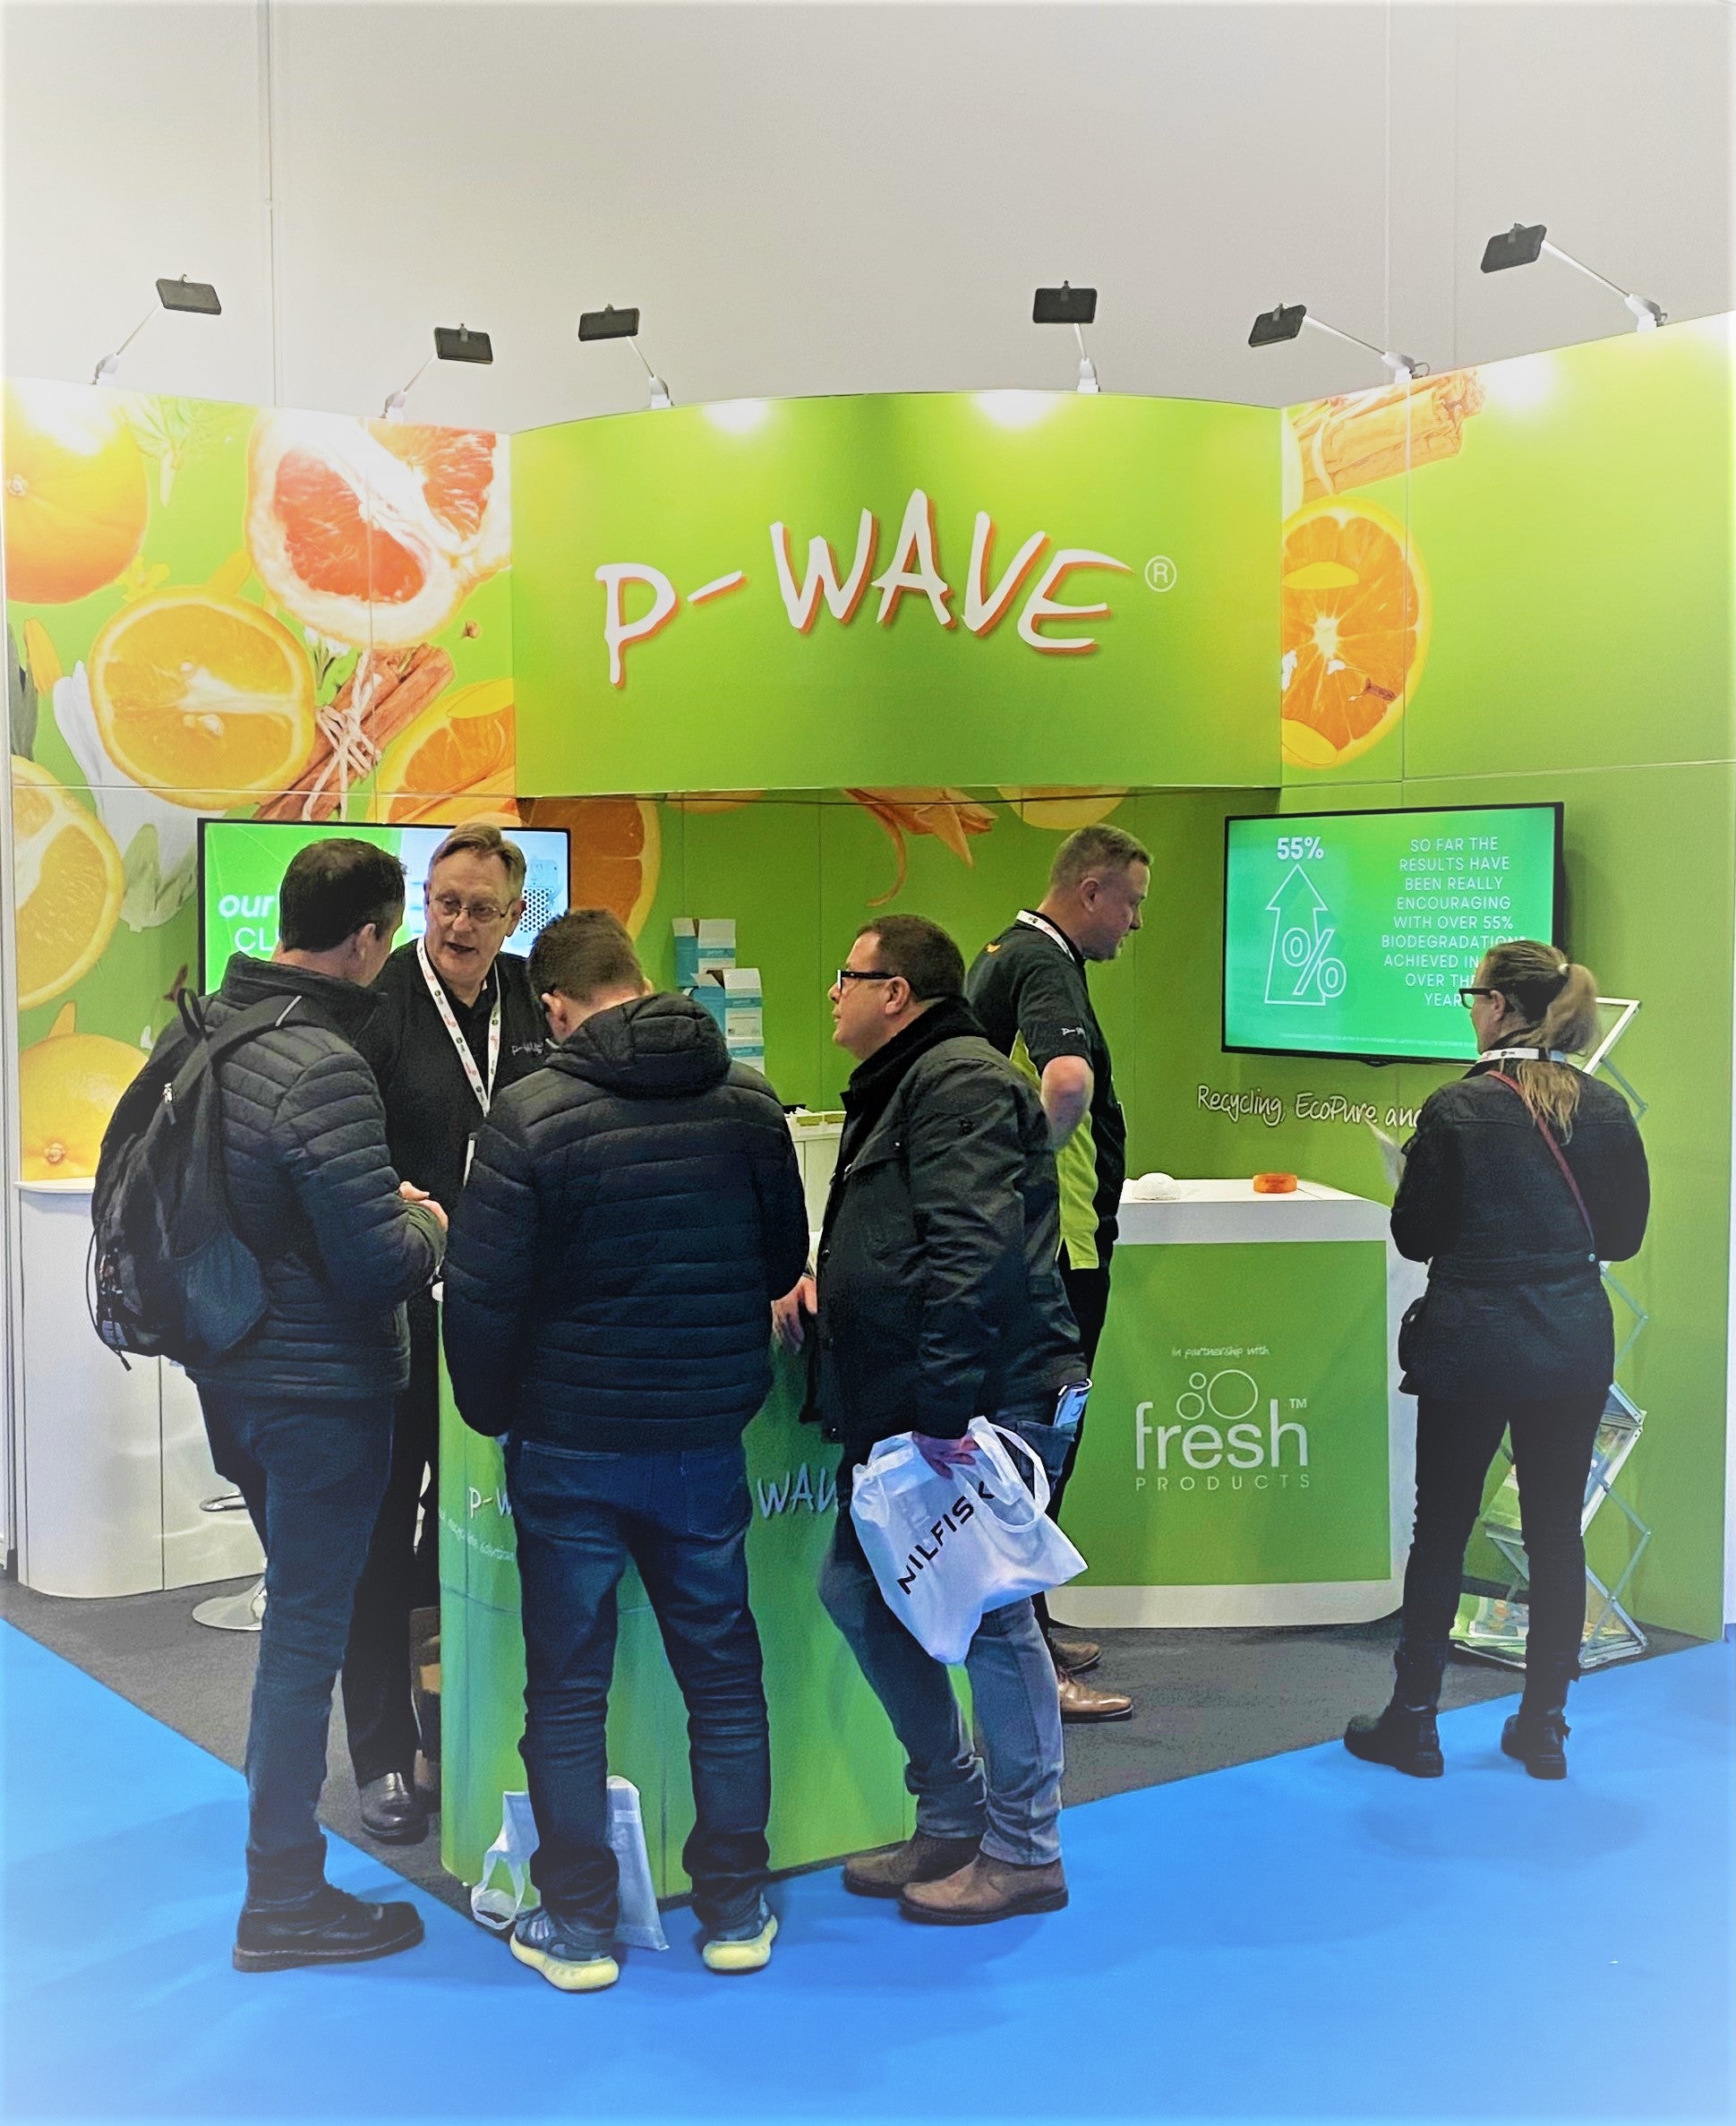 Busy P-Wave exhibition stand with fade